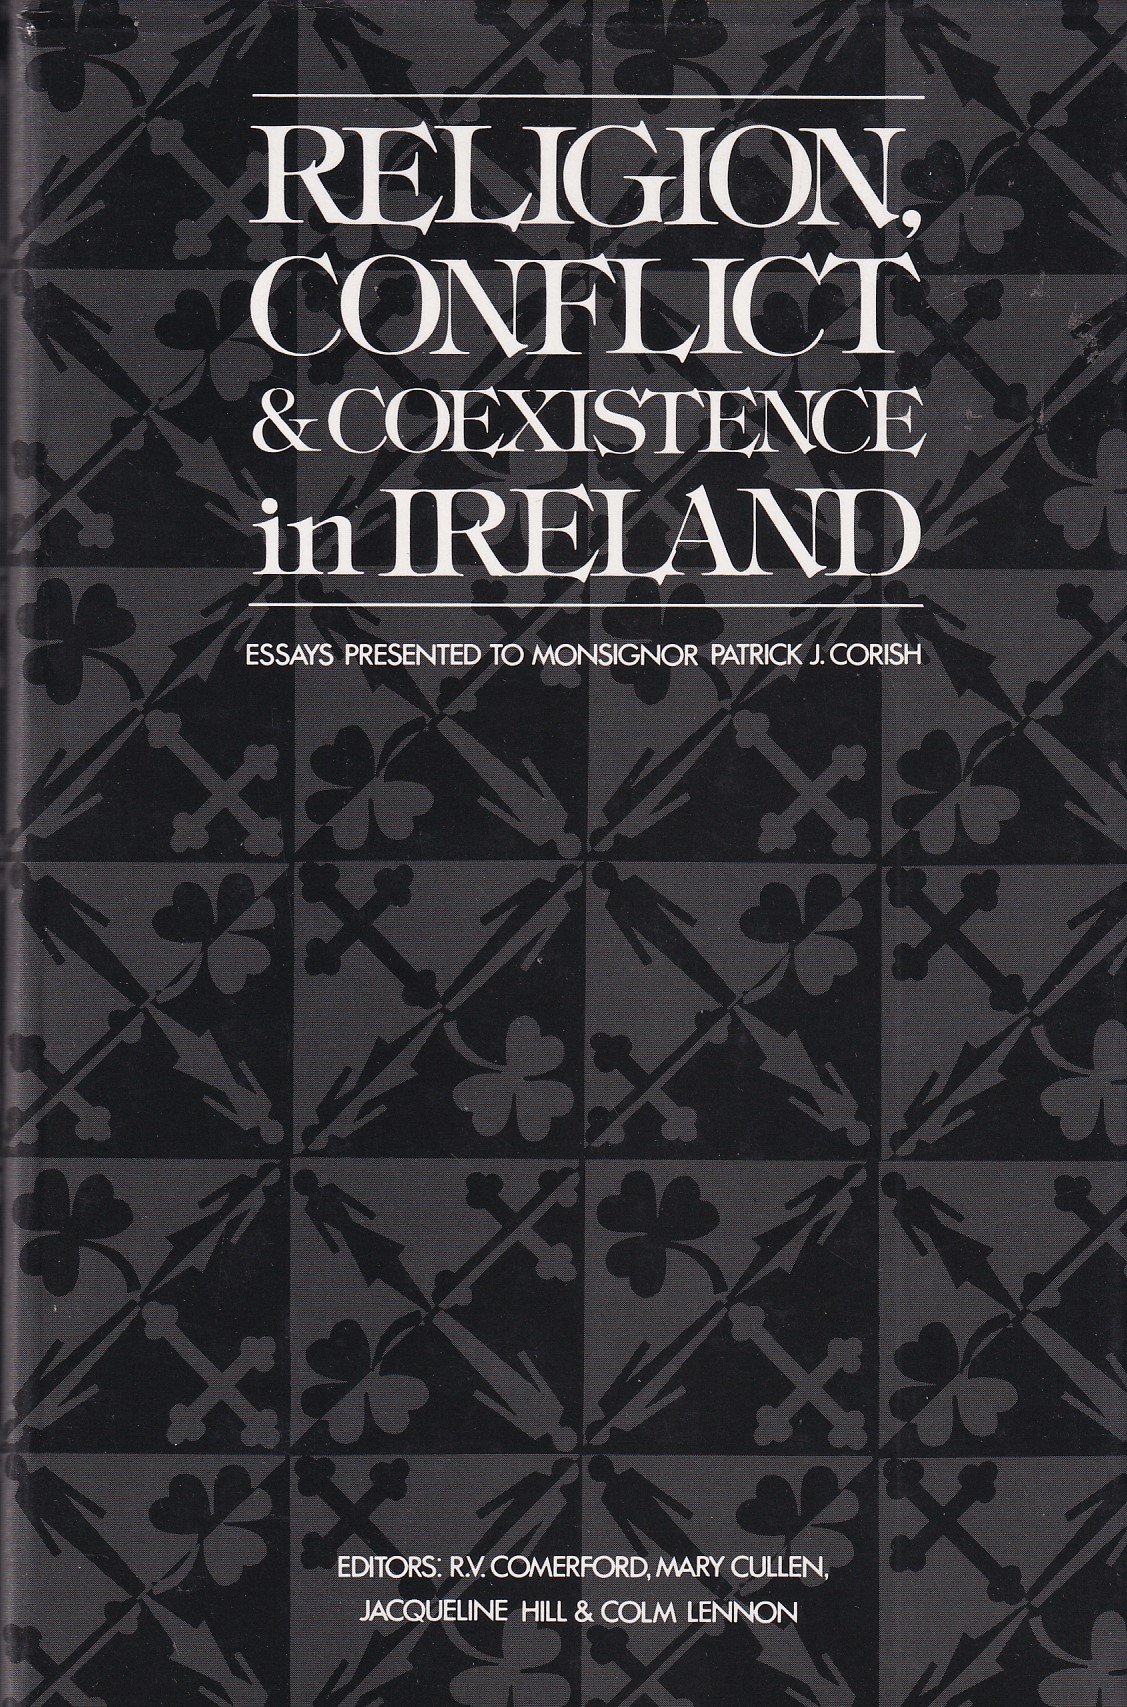 Religion, Conflict and Coexistence in Ireland: Essays Presented to Monsignor Patrick J. Corish by Comerford, RV et al (eds)